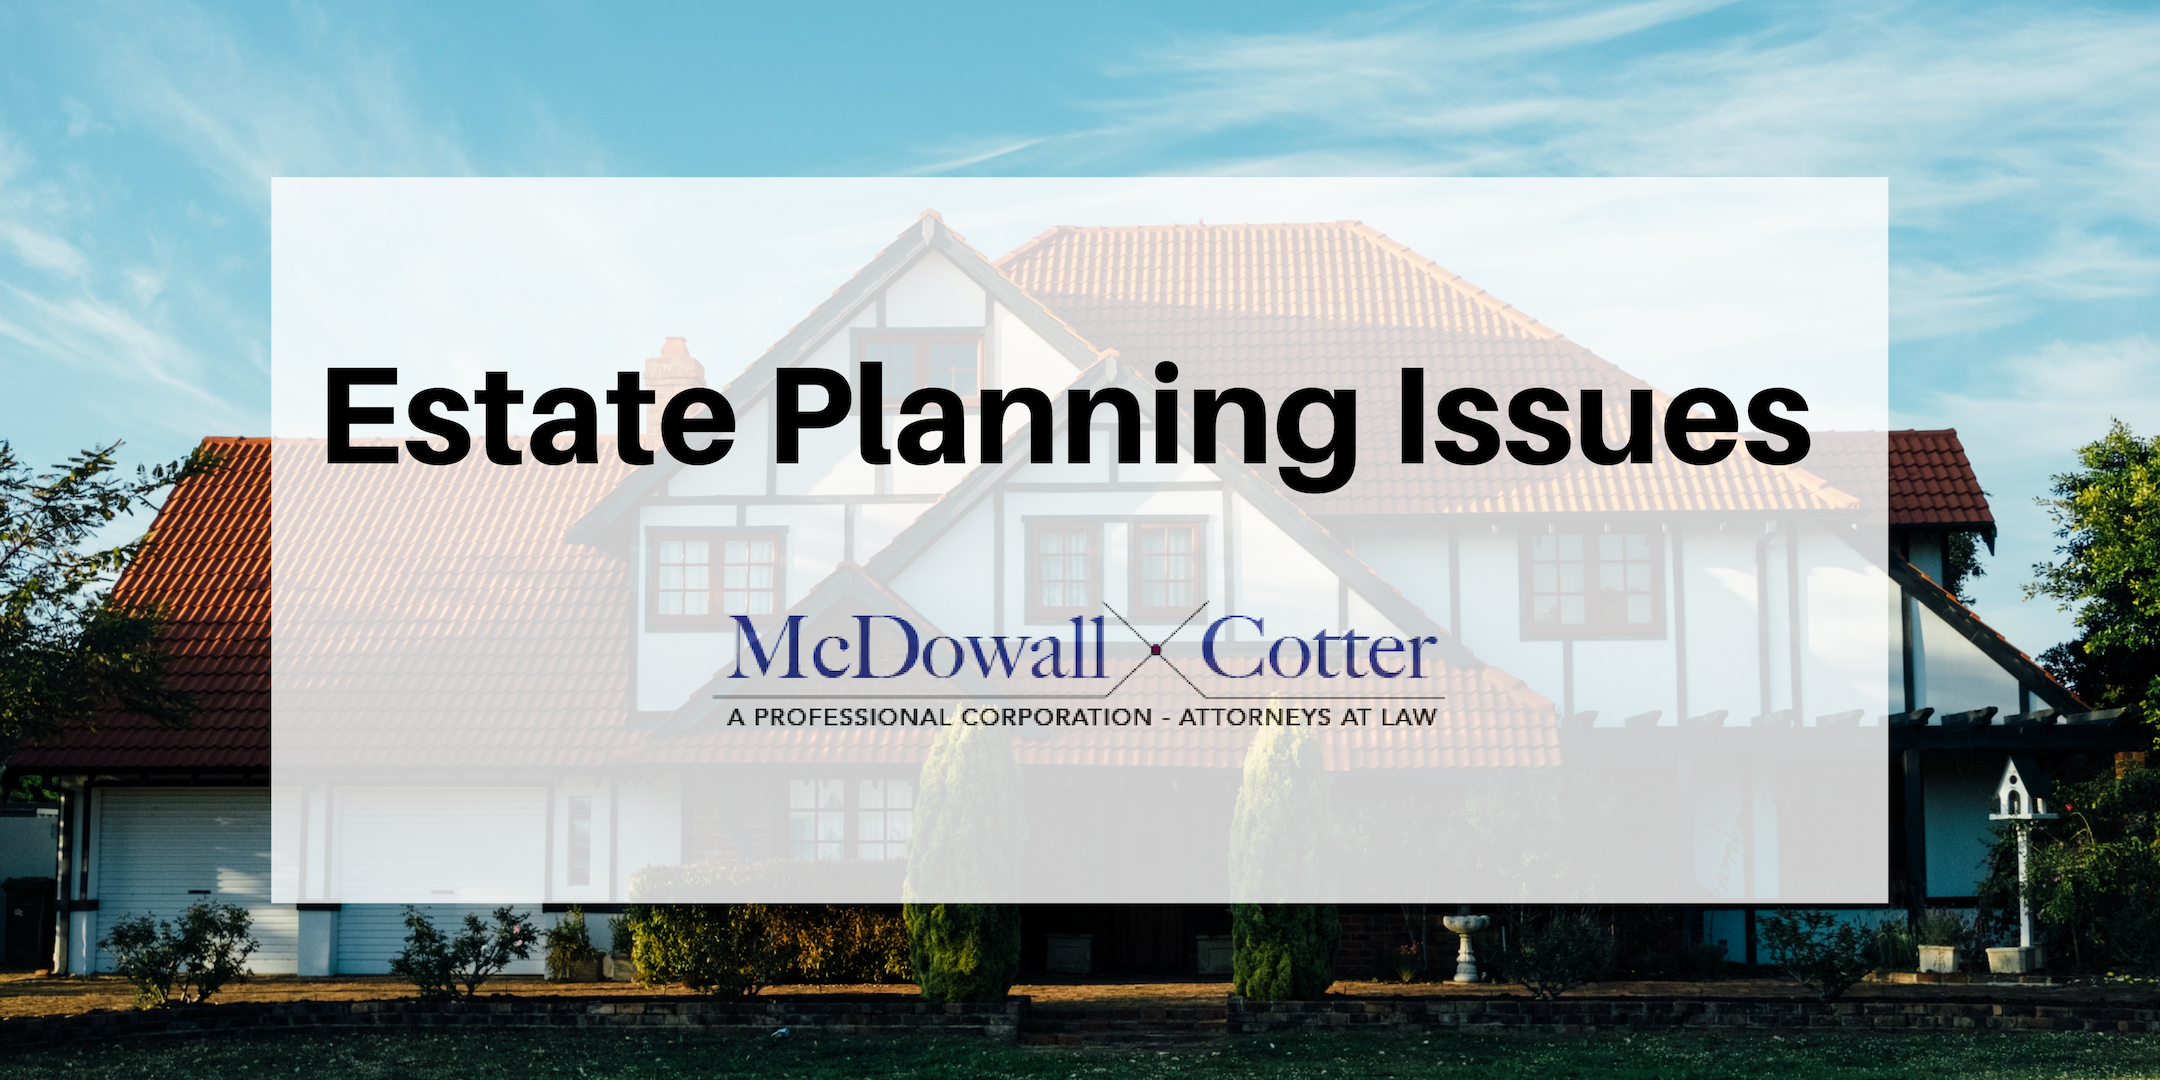 Estate Planning Issues Q&A